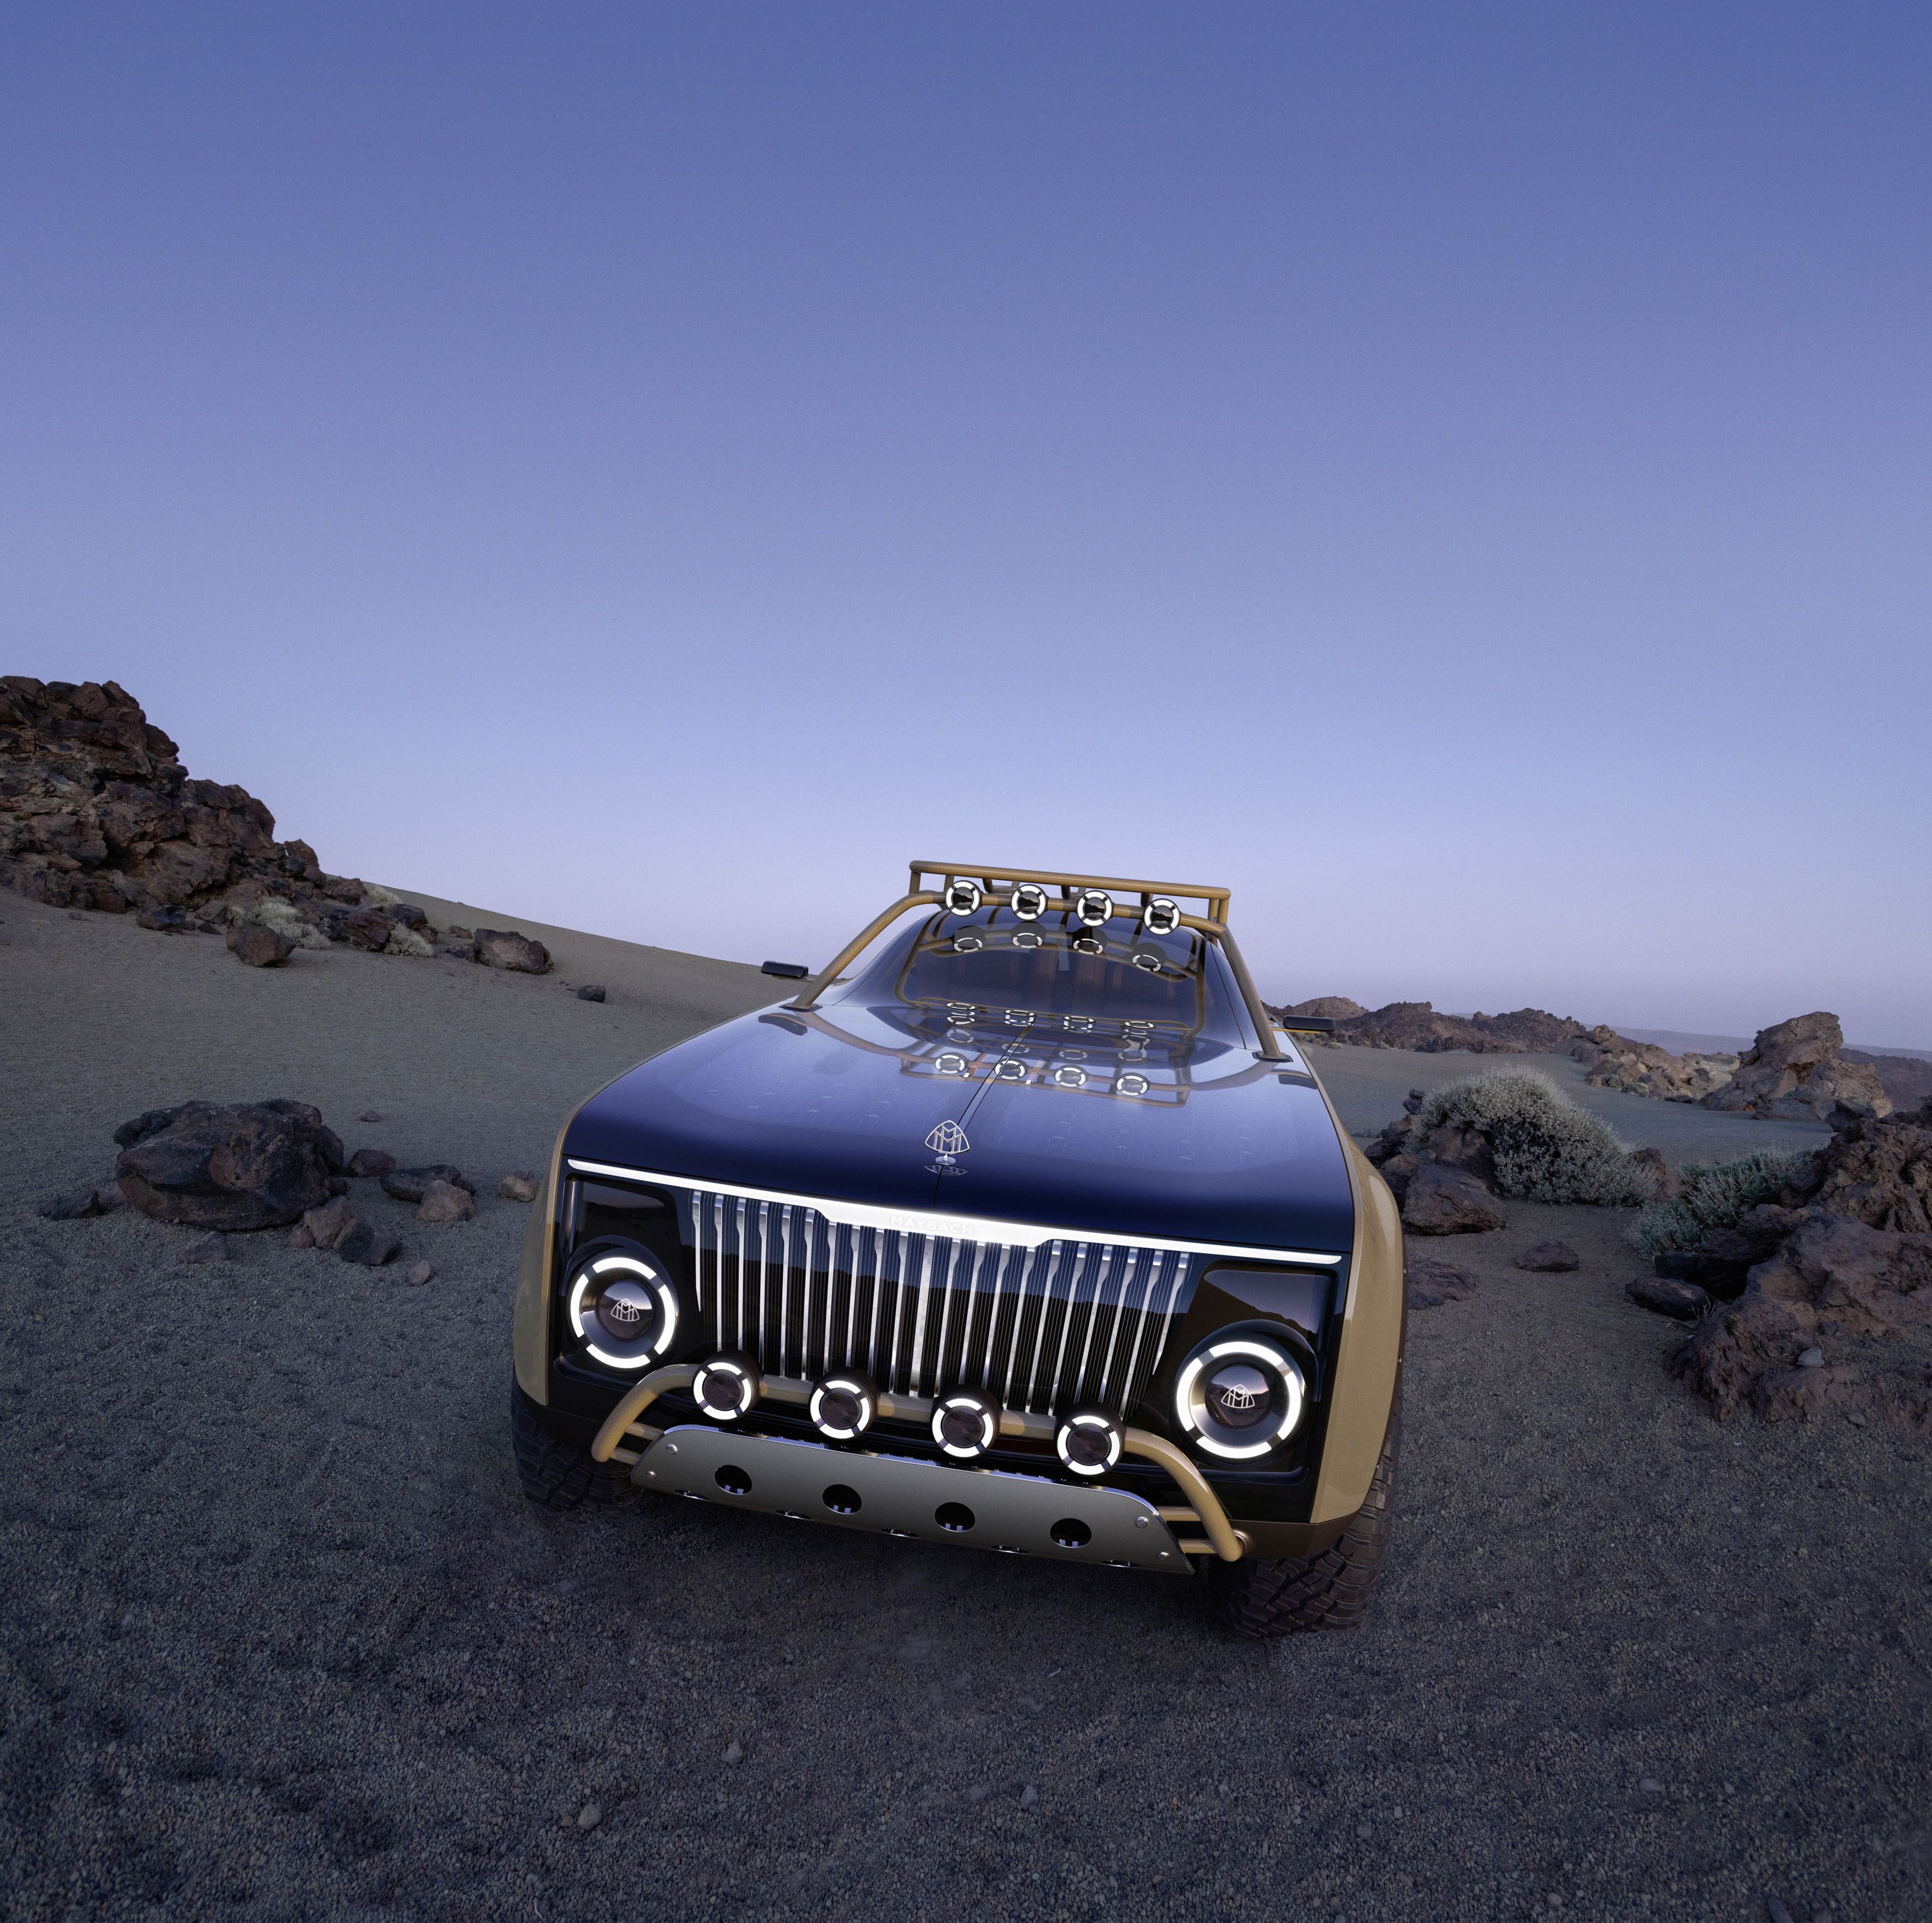 Project MAYBACH: the ultimate off-road coupé by Virgil Abloh!